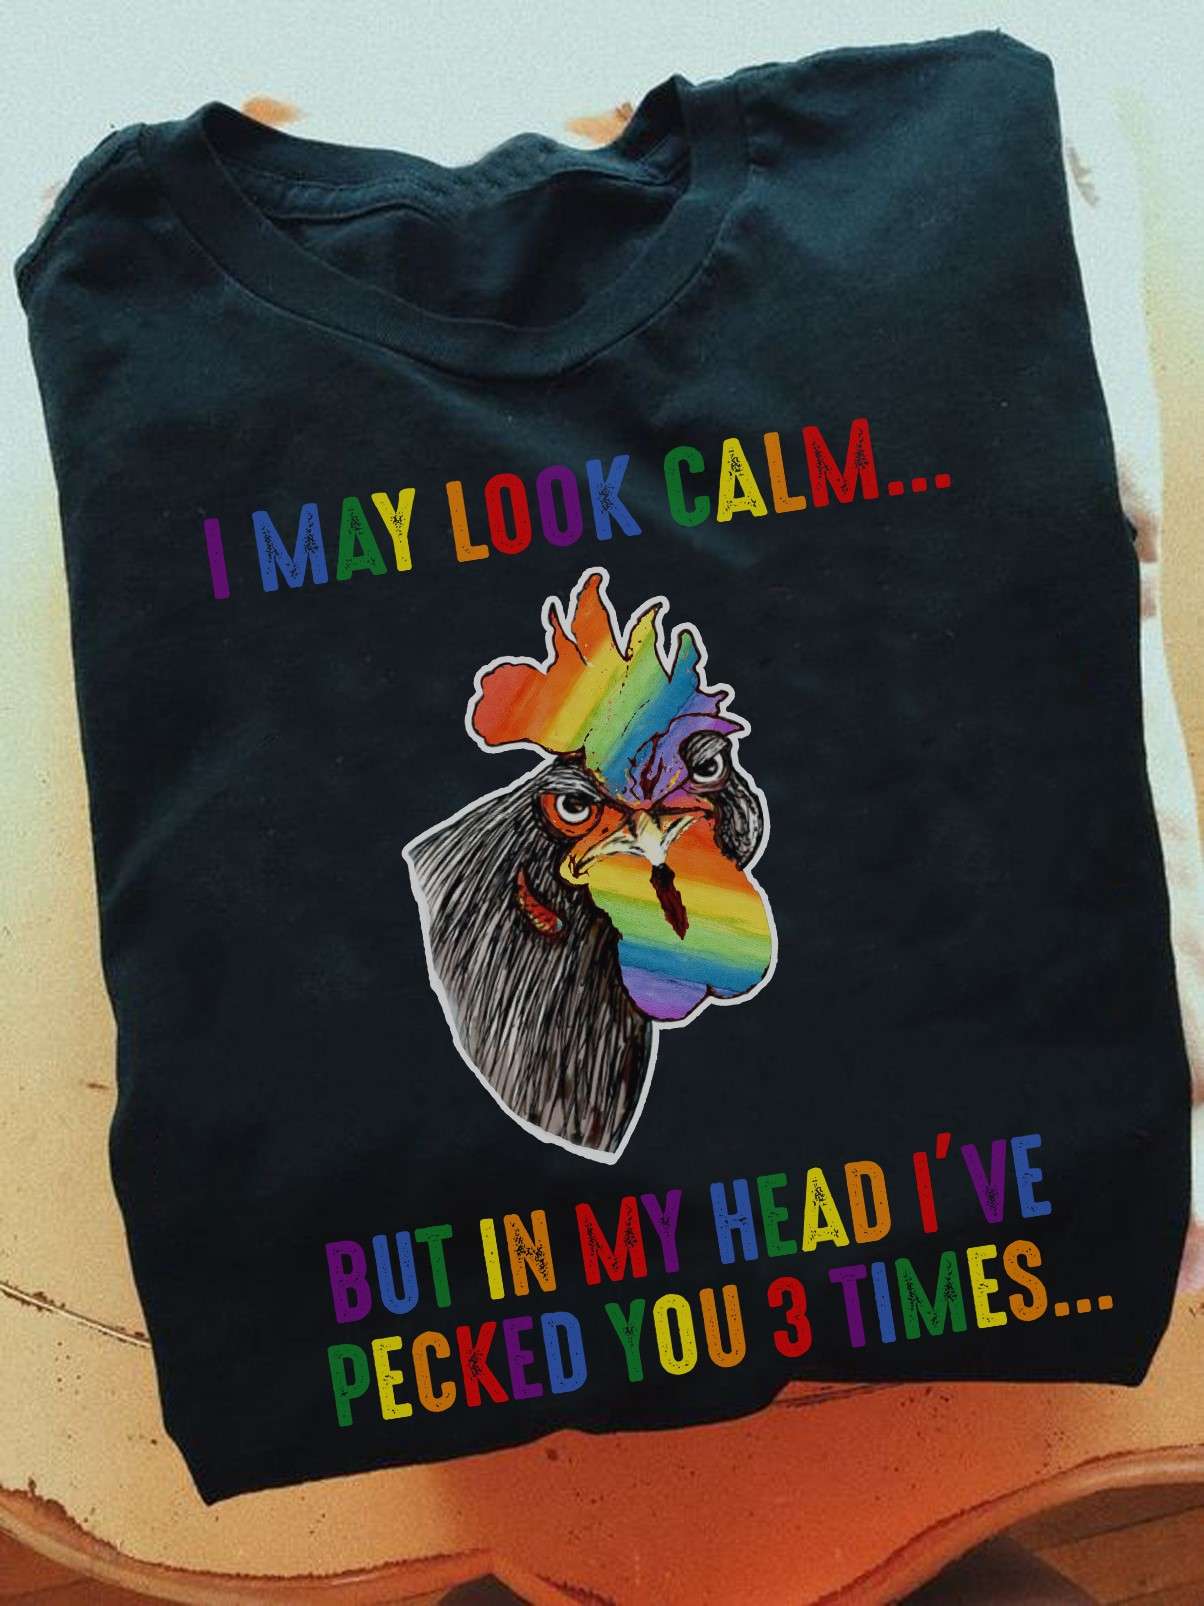 I may look calm but in my head I've pecked you 3 time - Lgbt chicken peck, lgbt community